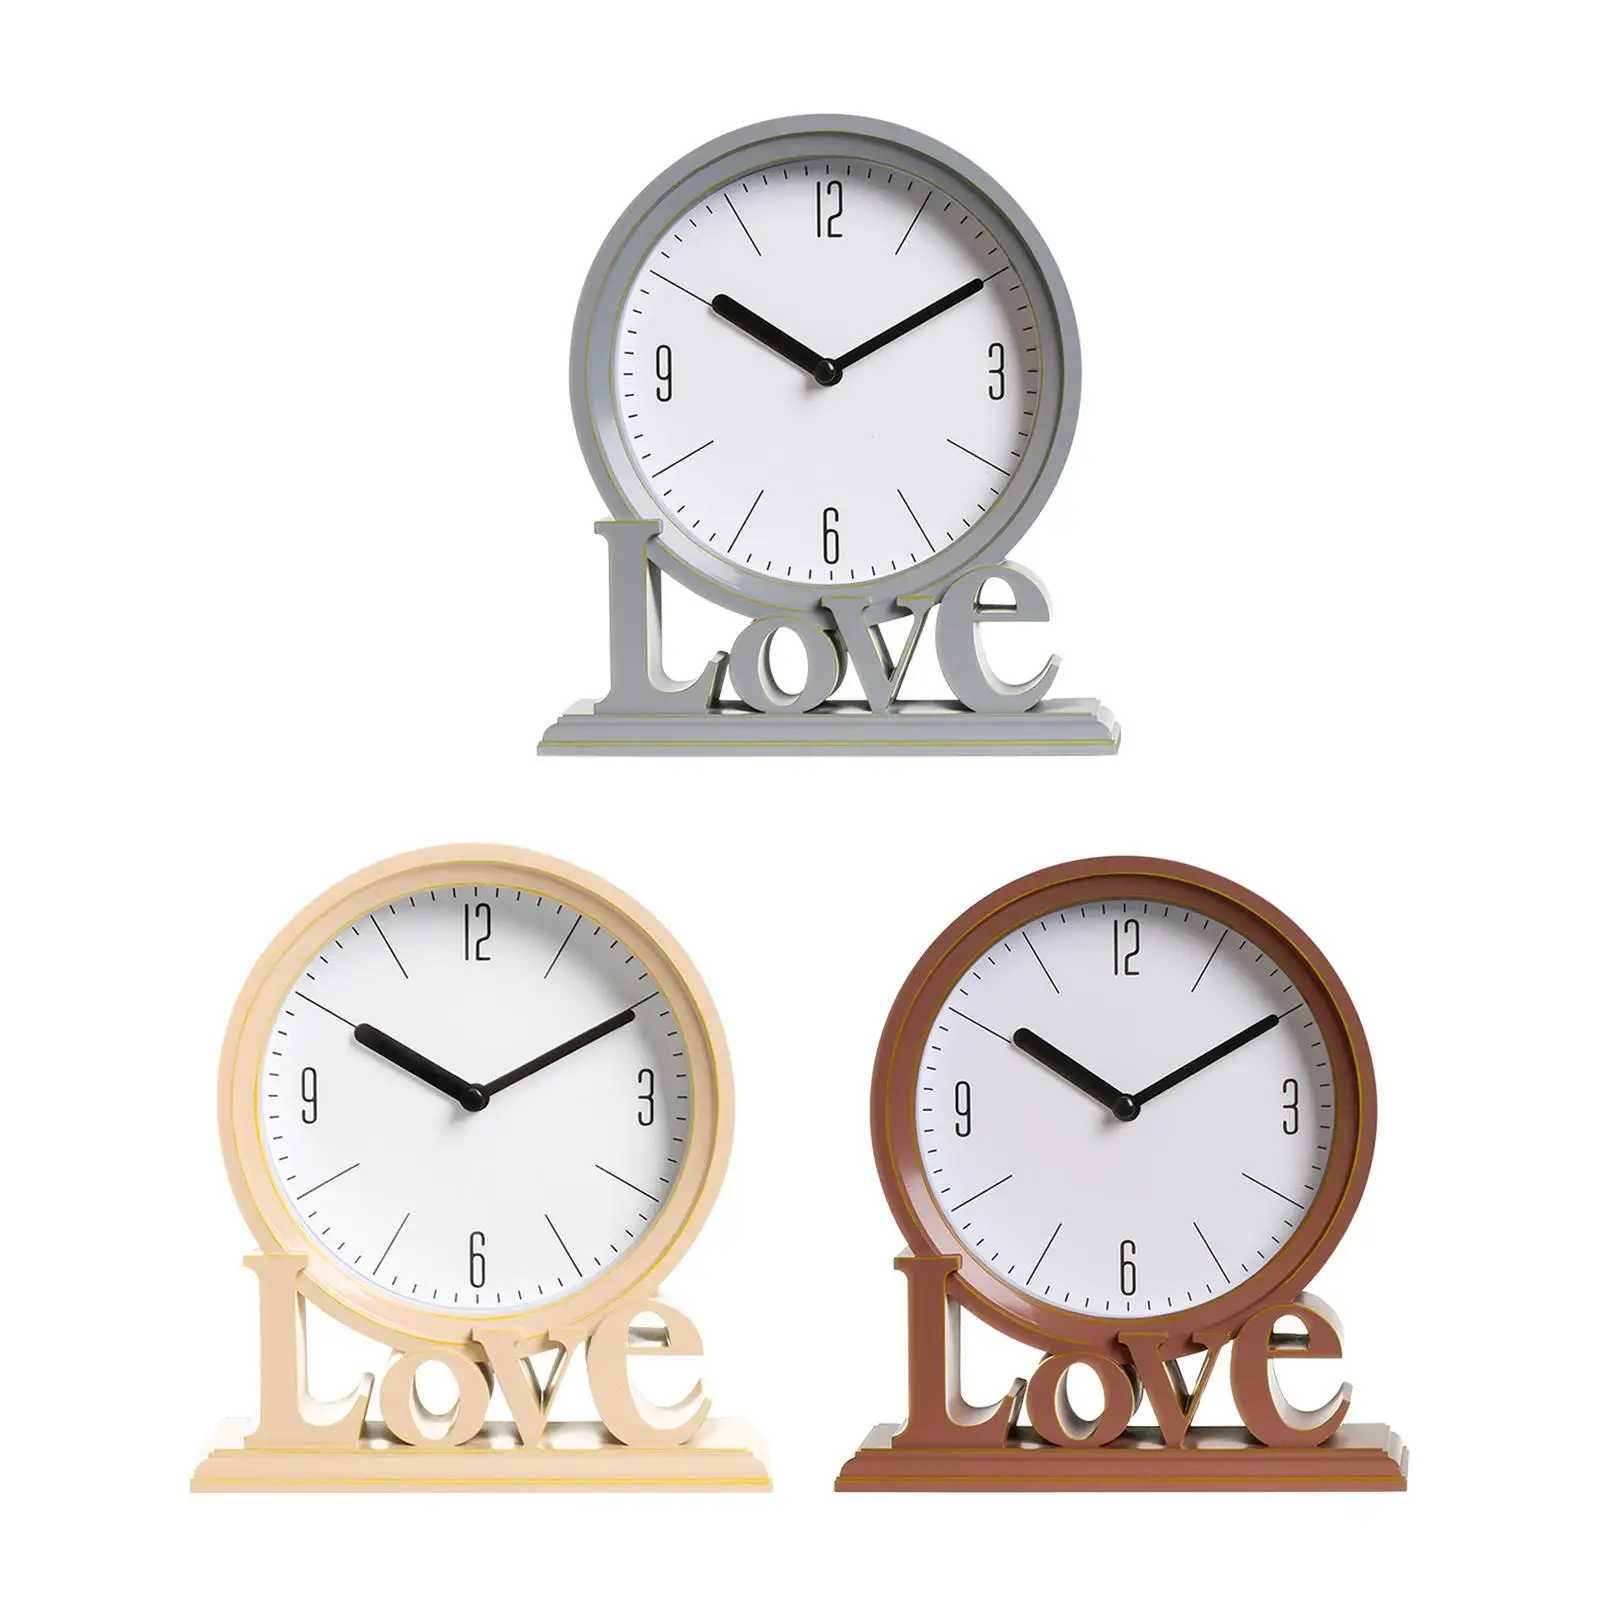 Romantic Love Letter Table Clock Silent Decoration Keeping Accurate Time